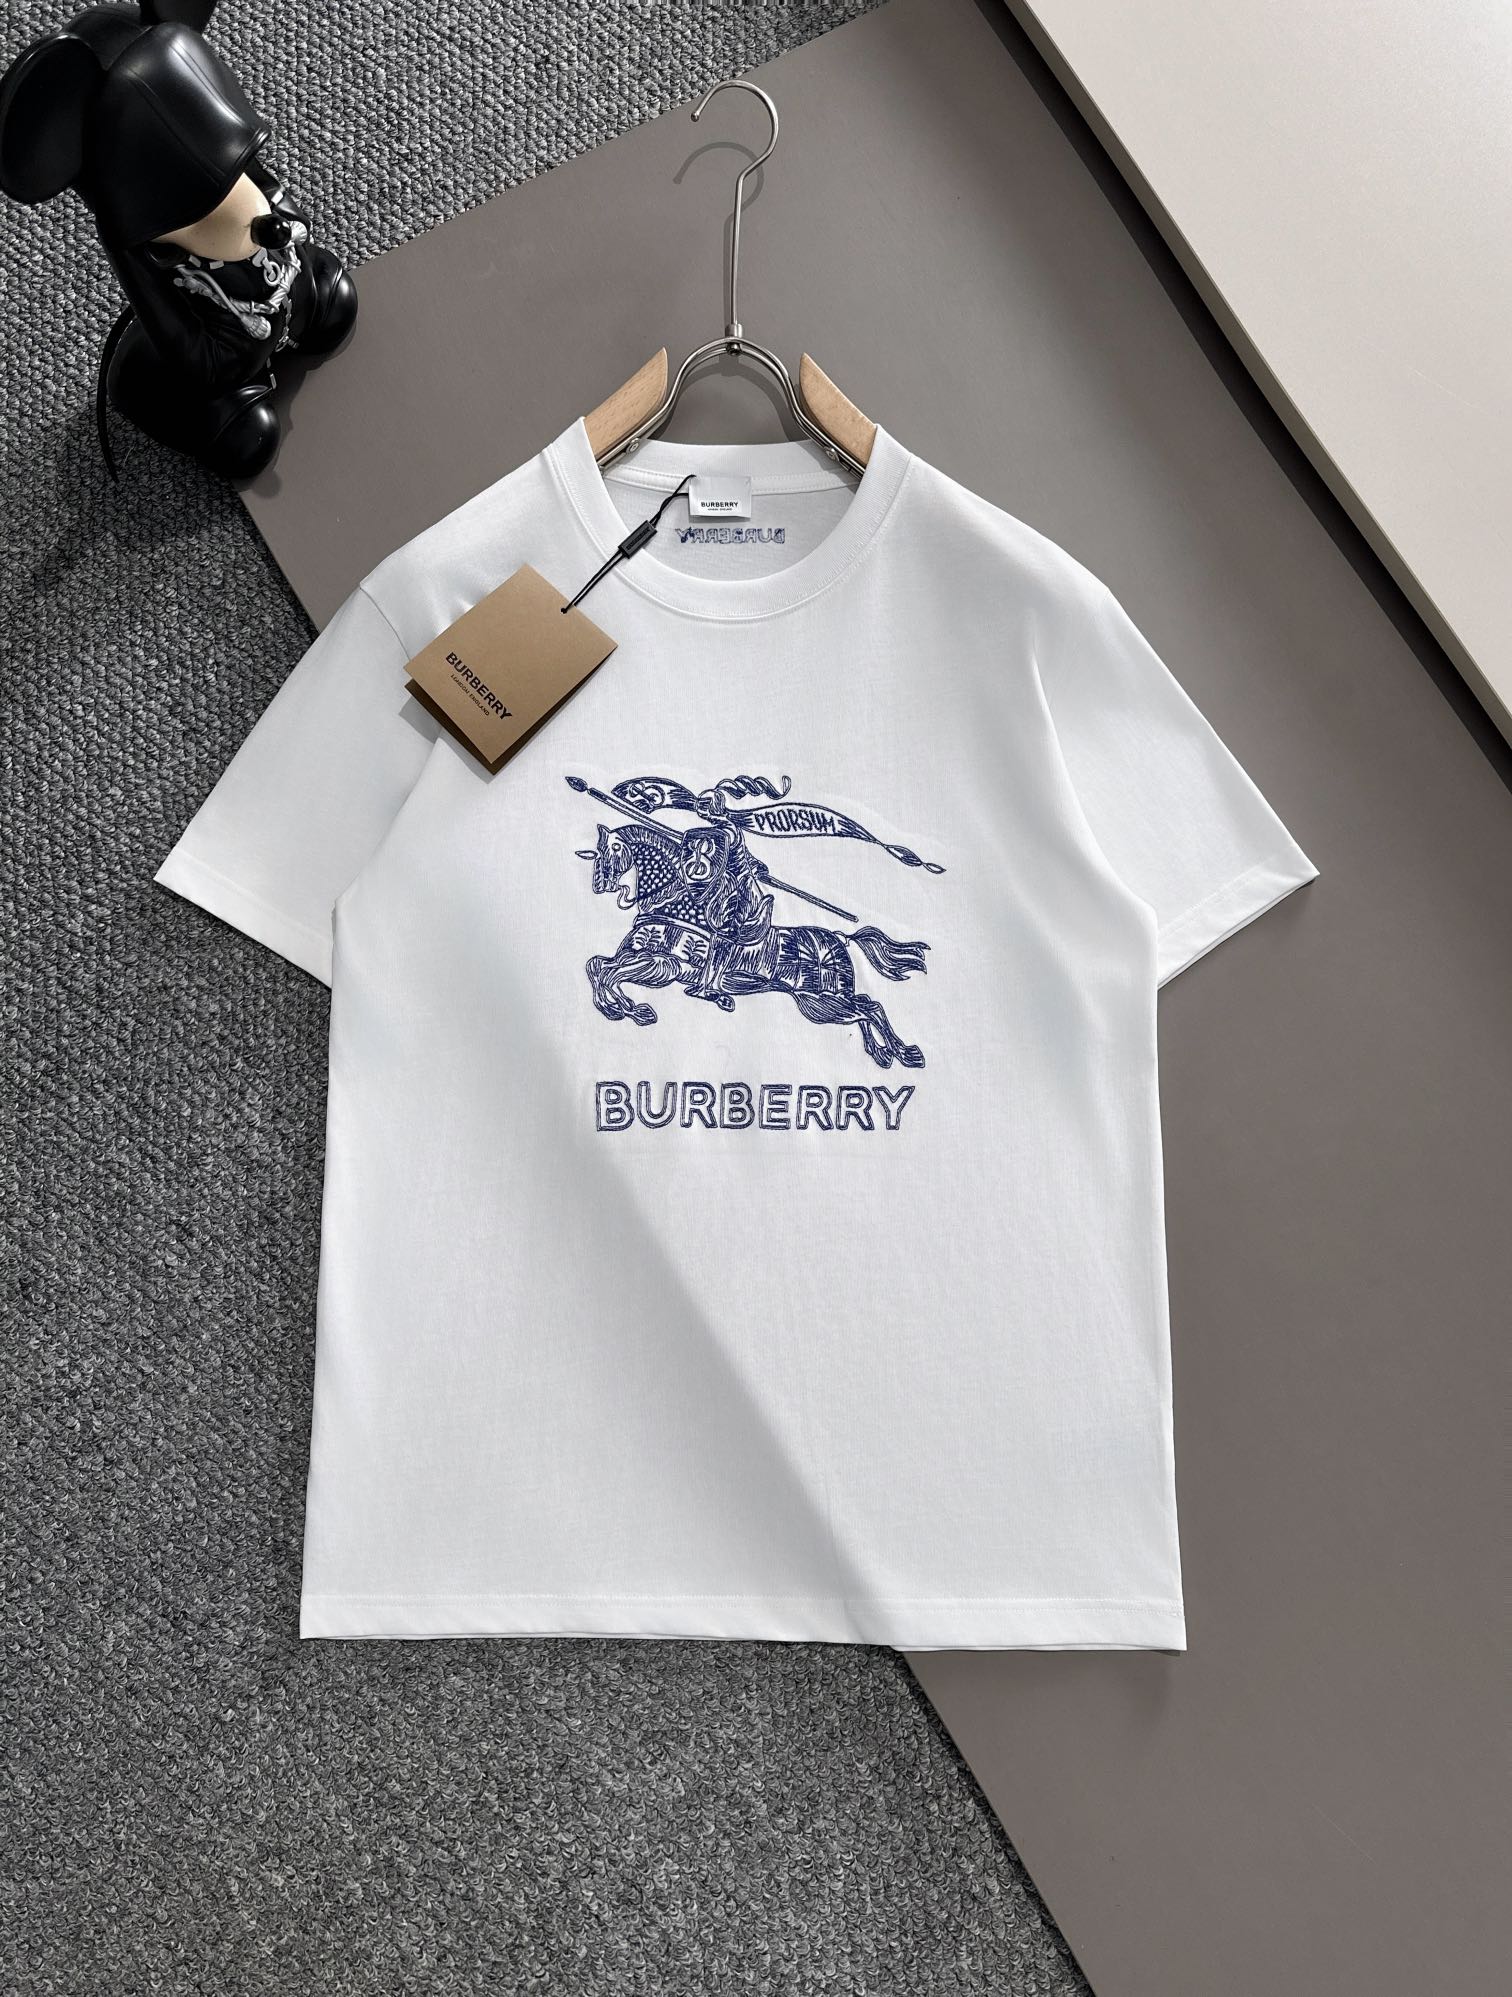 Burberry Clothing T-Shirt Embroidery Cotton Short Sleeve